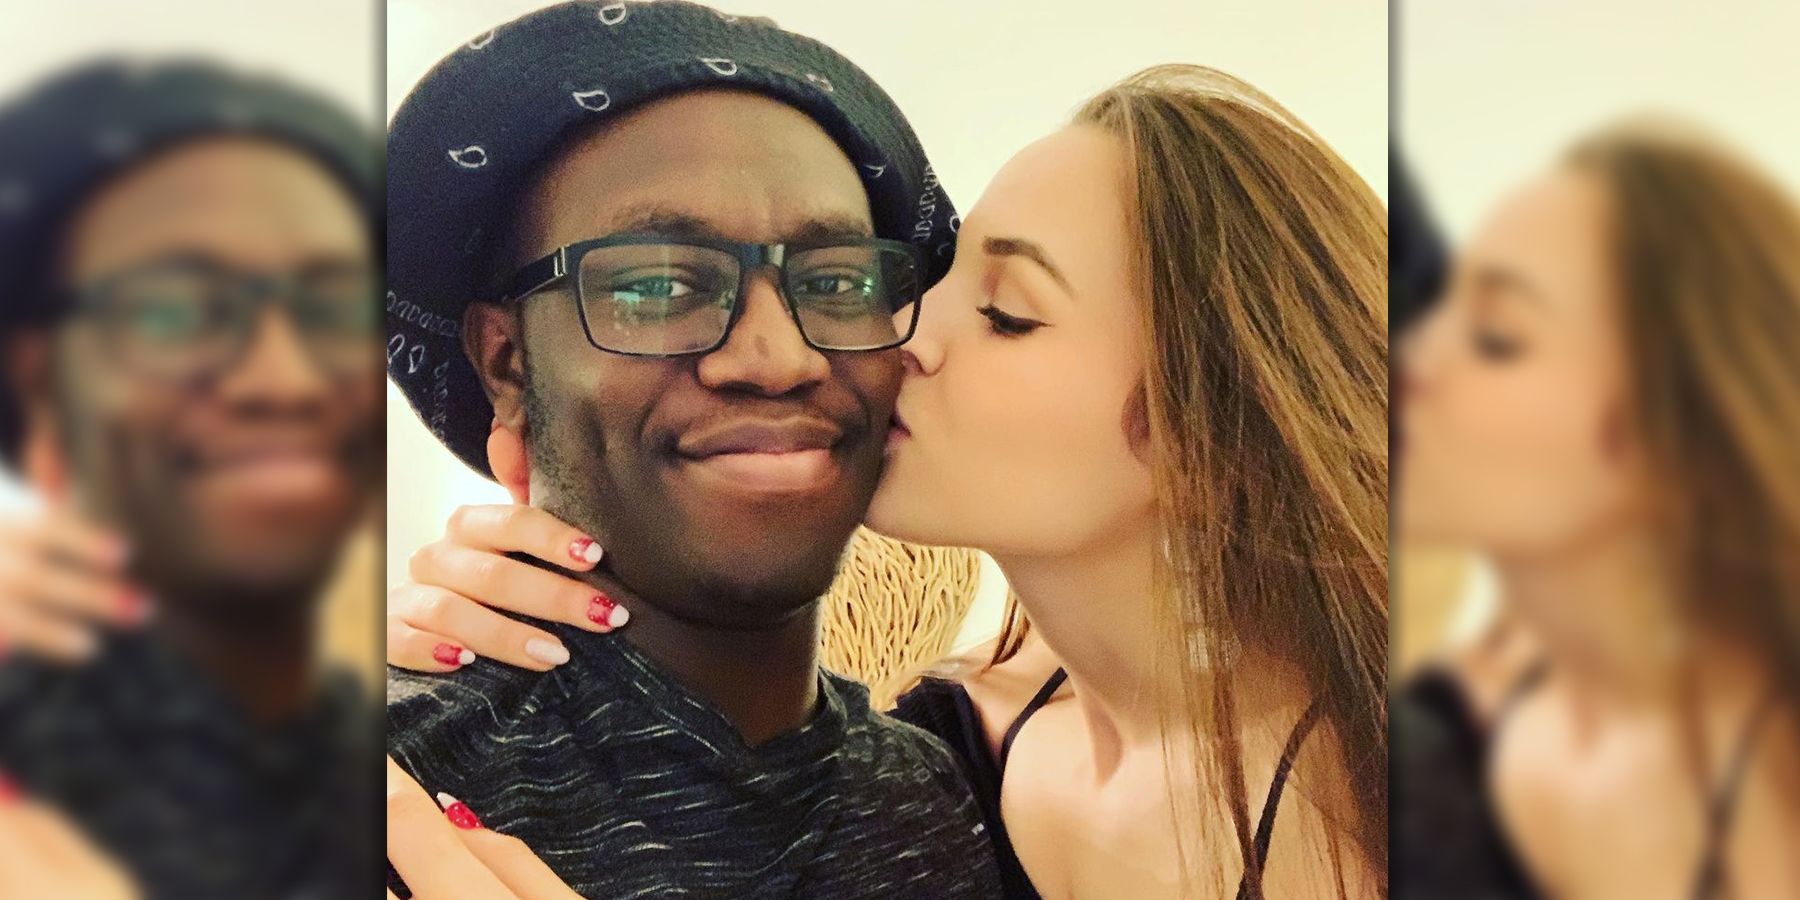 Dejis Girlfriend Dunjahh Accused of Making Racist Statements During Twitch Stream